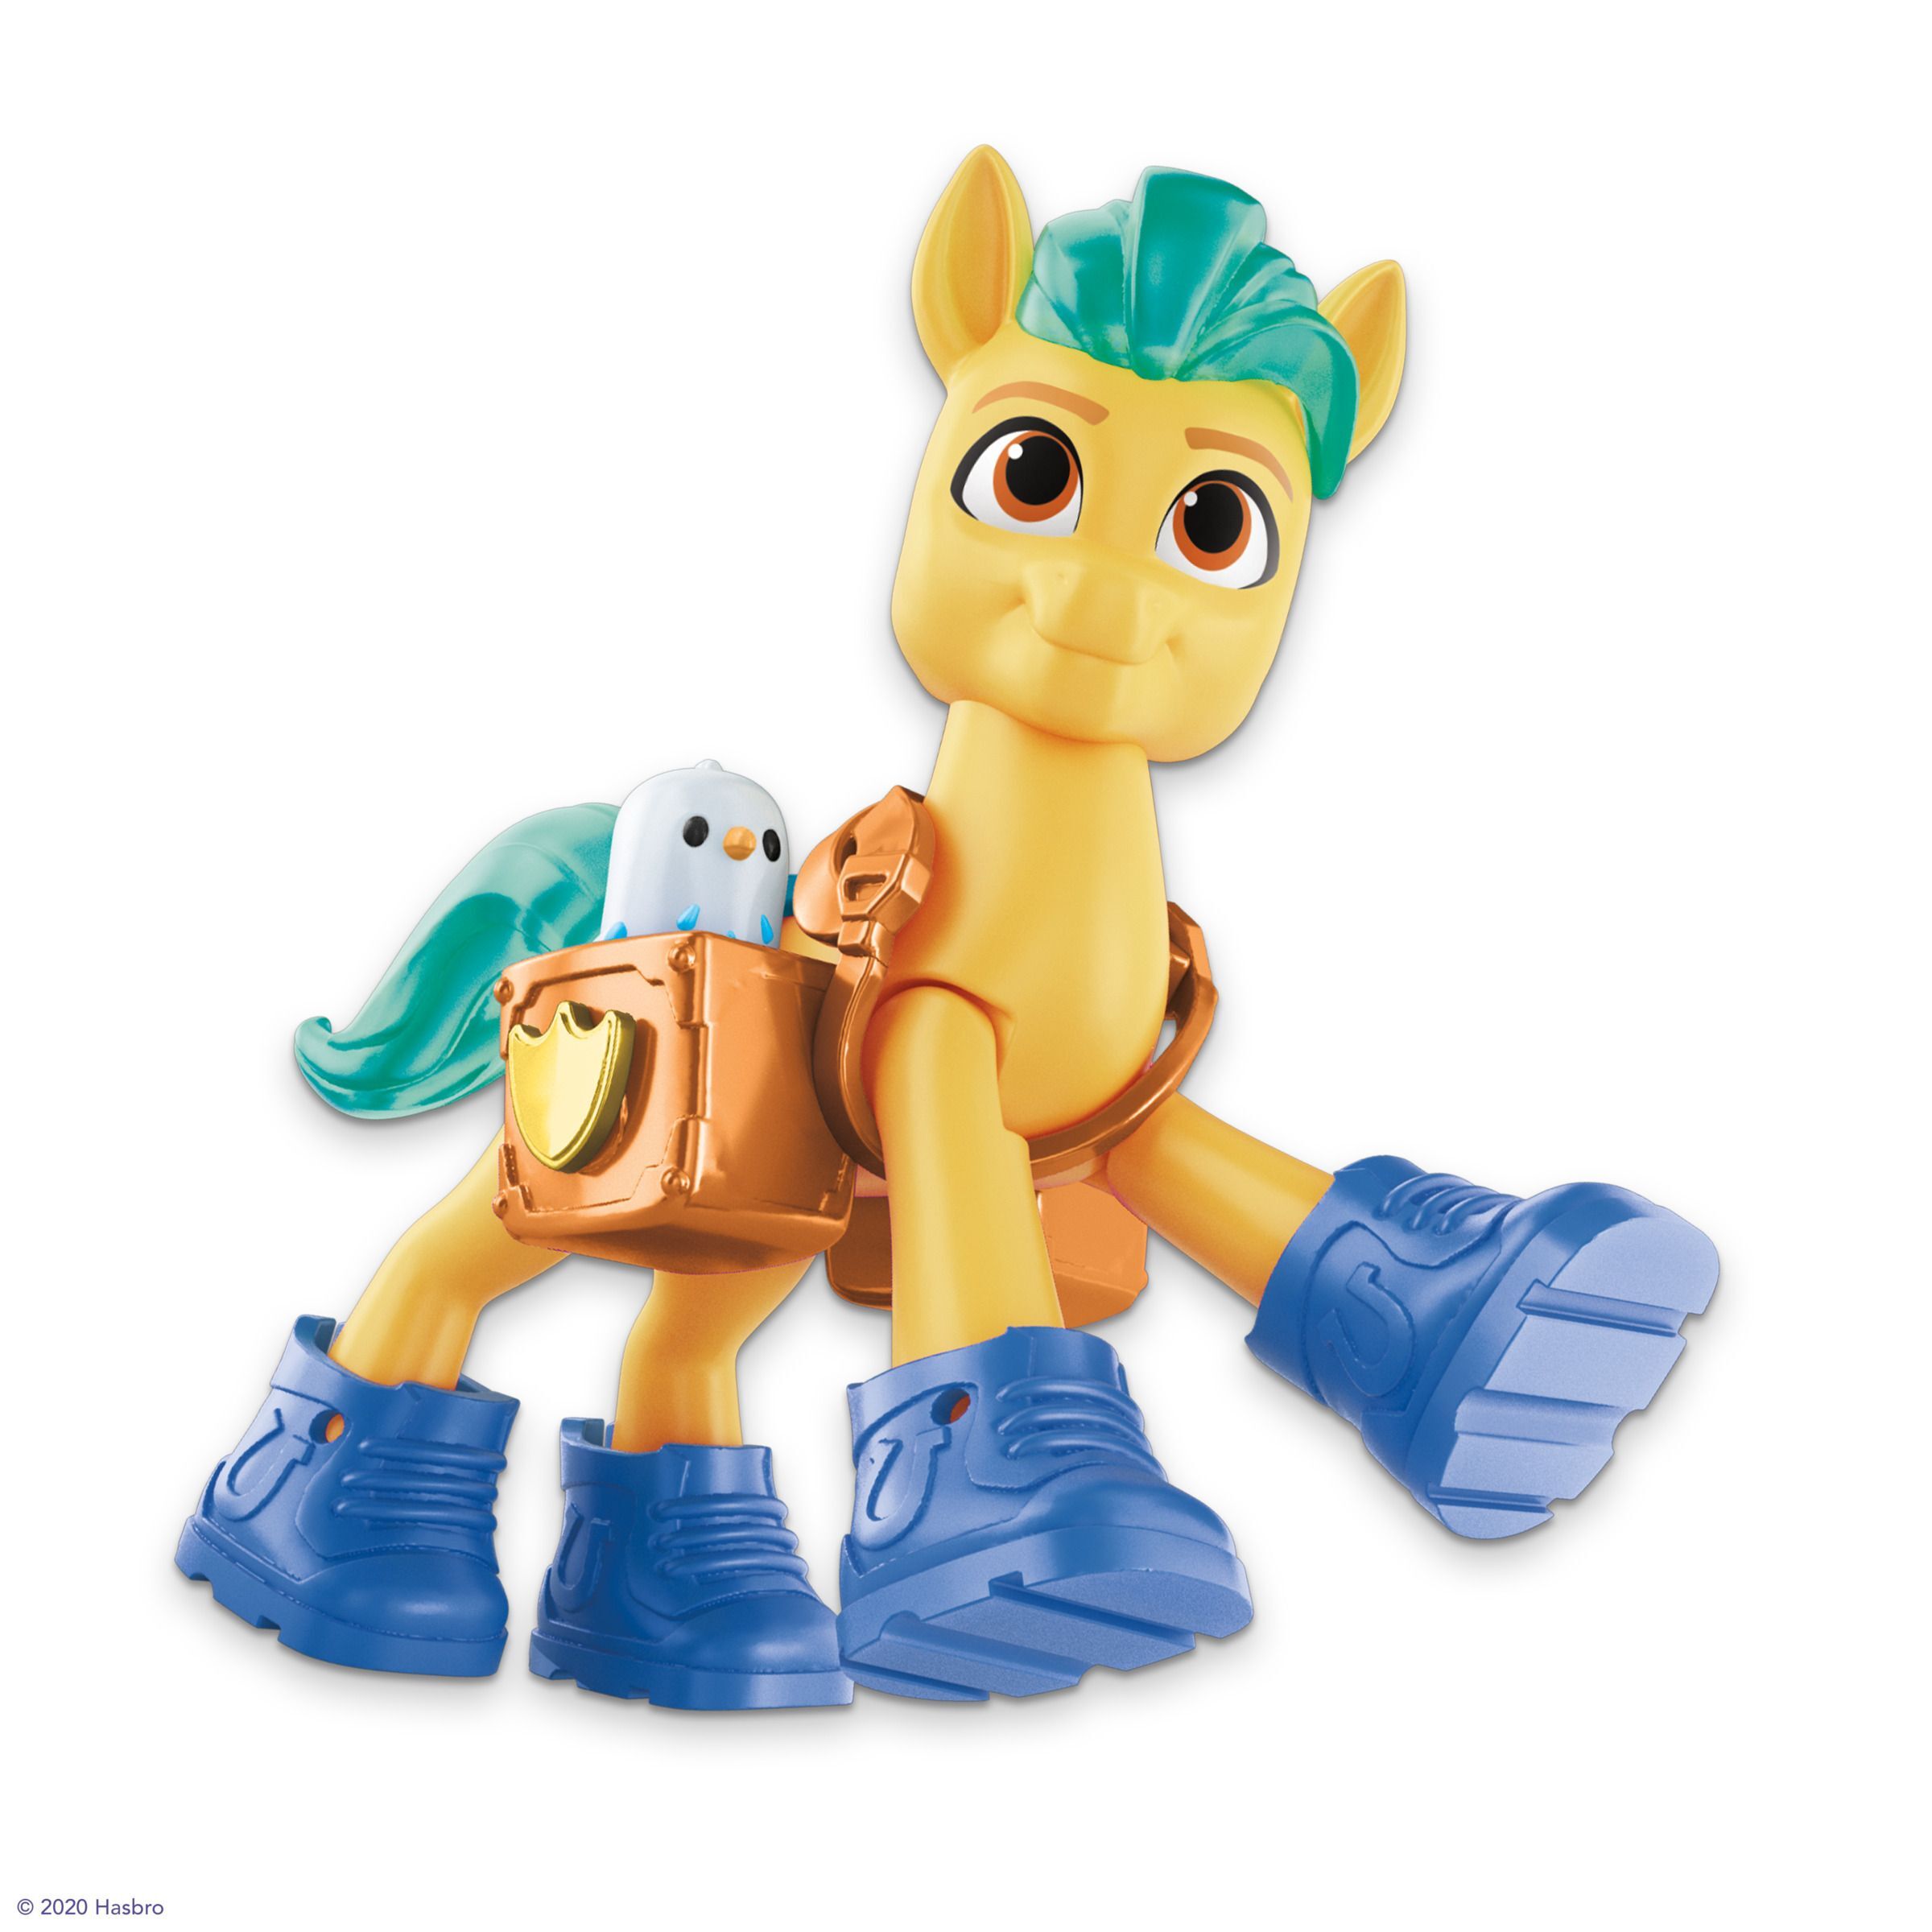 My Little Pony: A New Generation' Saddles Up to the Message of